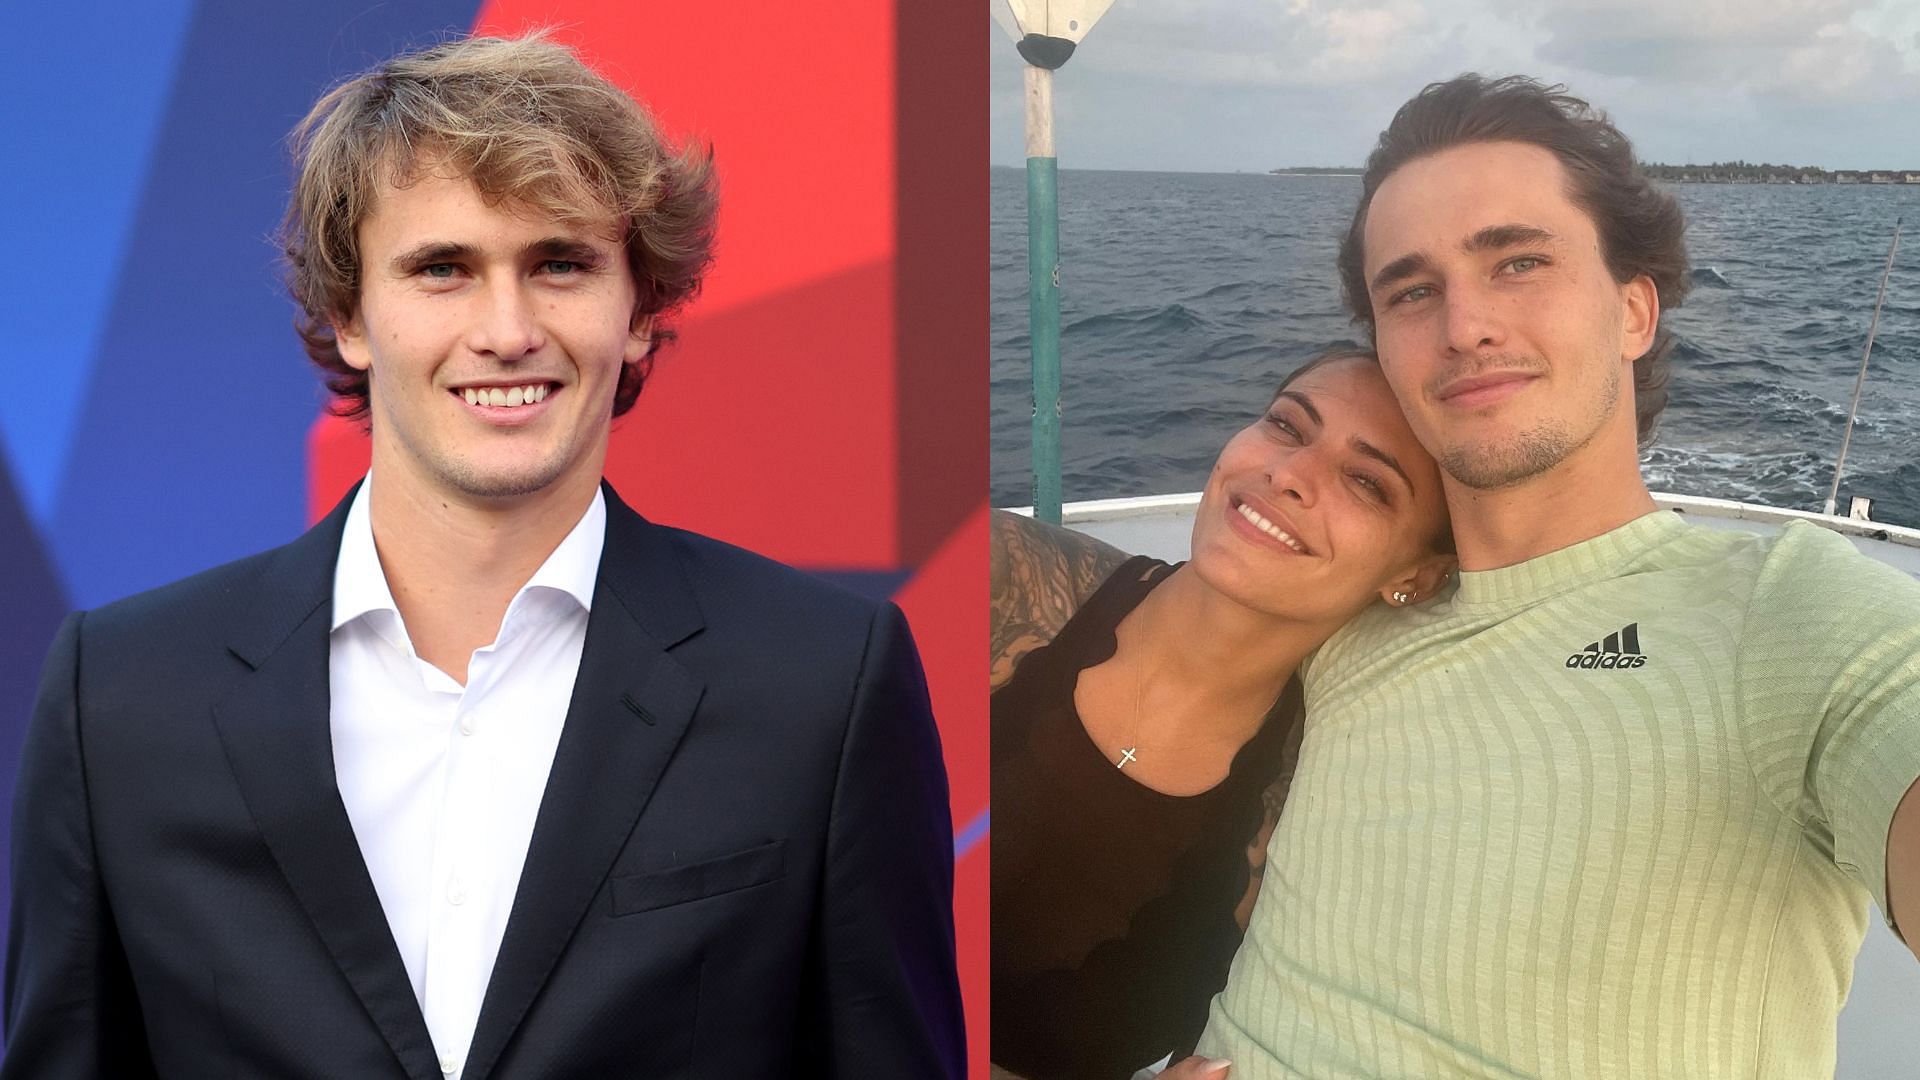 Alexander Zverev showers girlfriend with plushie gifts after arcade game success